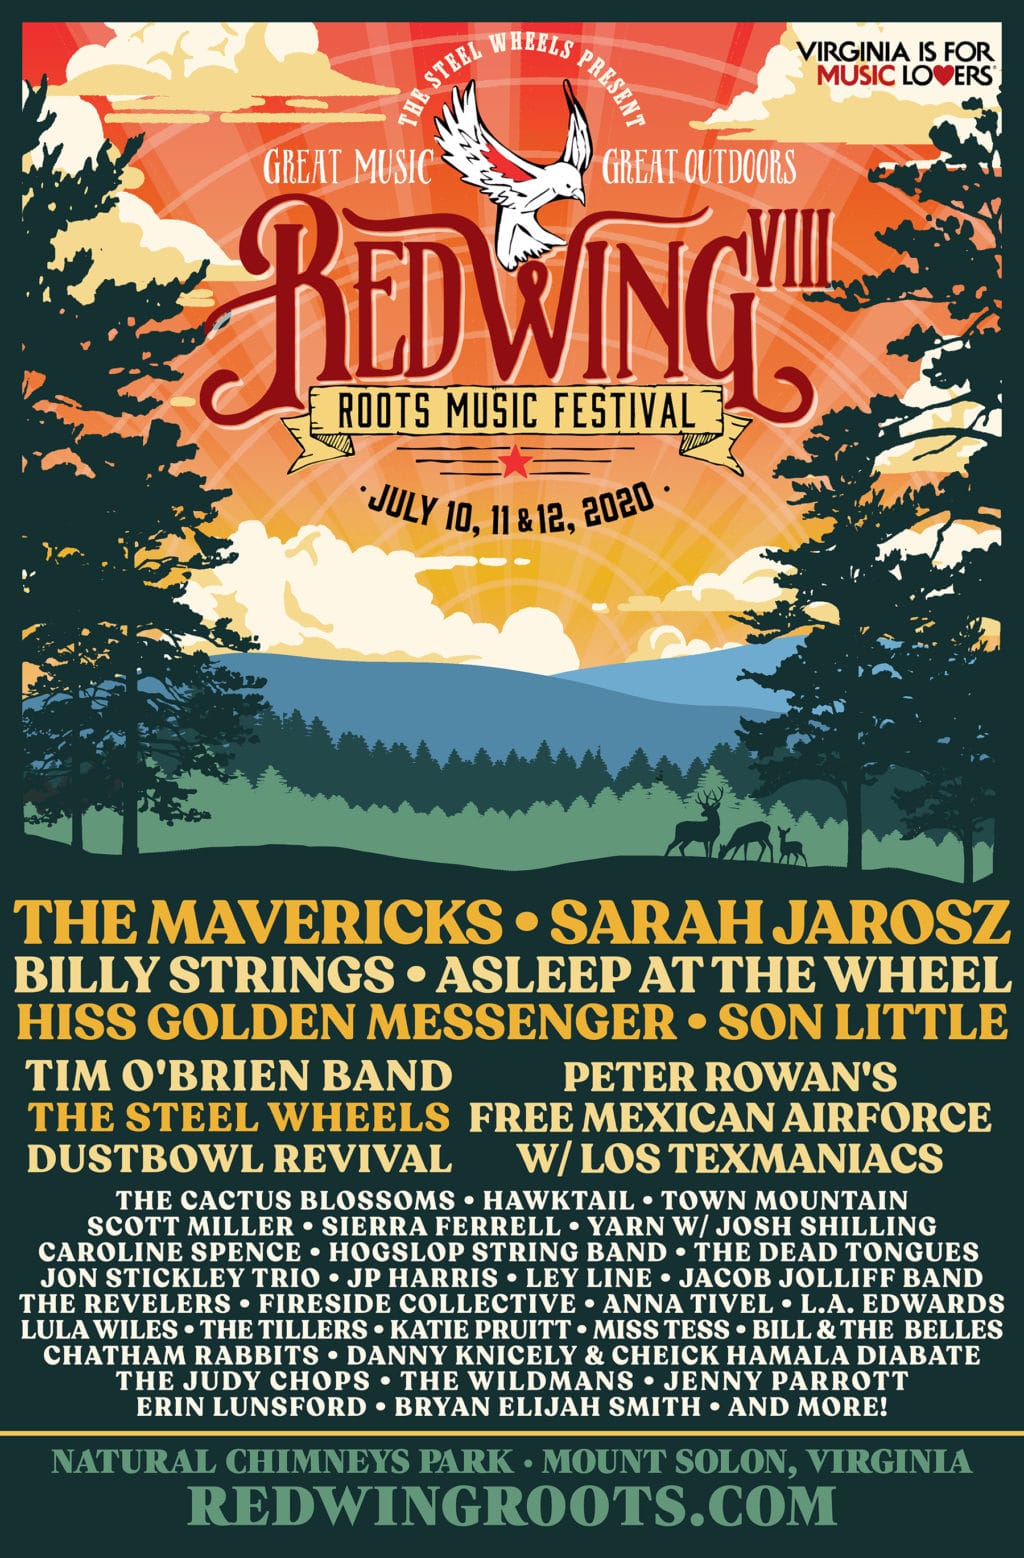 8th annual Red Wing Roots Music Festival announces full lineup MUSIC